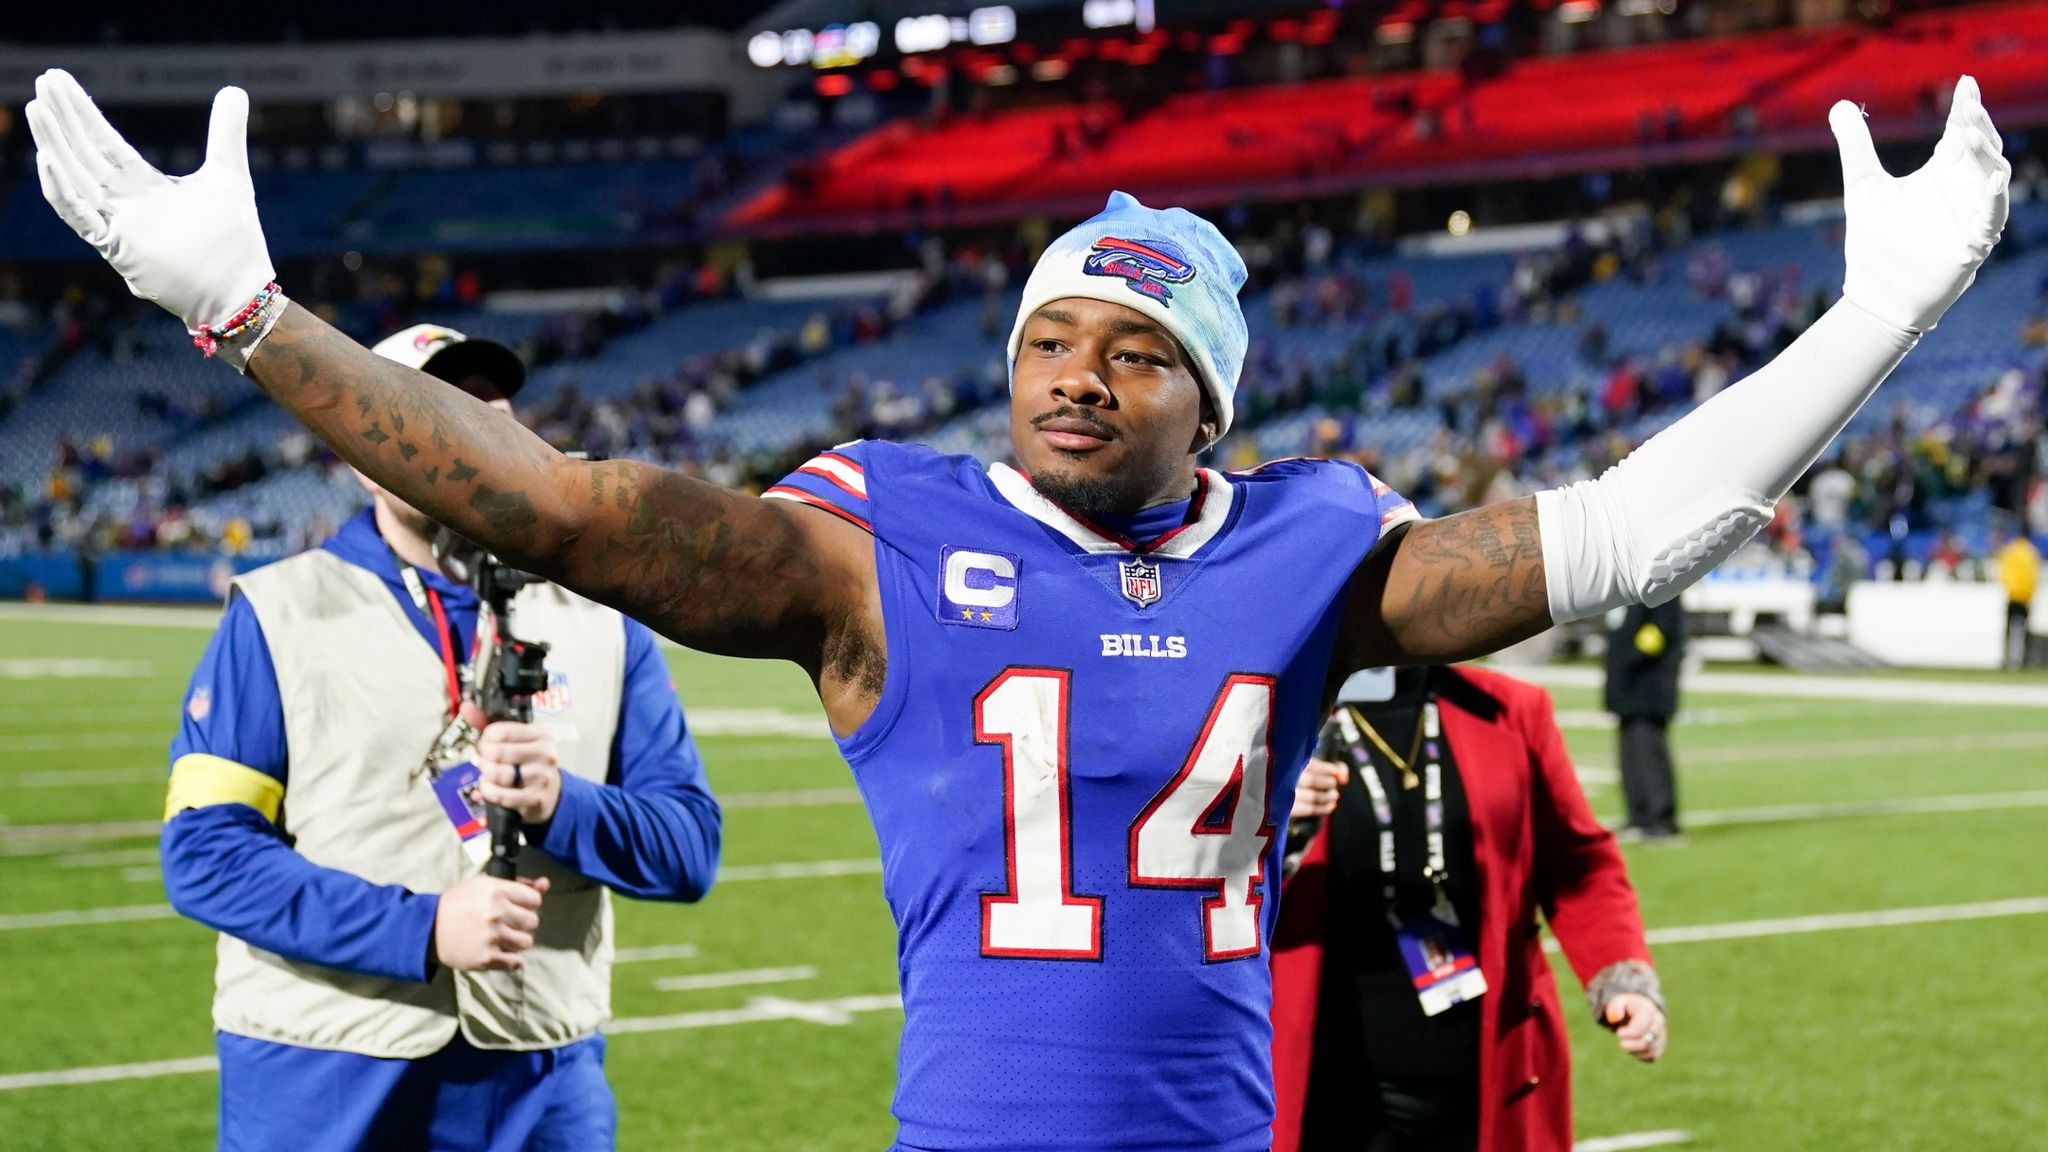 Buffalo Bills wide receiver Stefon Diggs (14) runs off the field after an NFL  football game against the Green Bay Packers, Sunday, Oct. 30, 2022, in  Orchard Park, N.Y. (AP Photo/Bryan Bennett